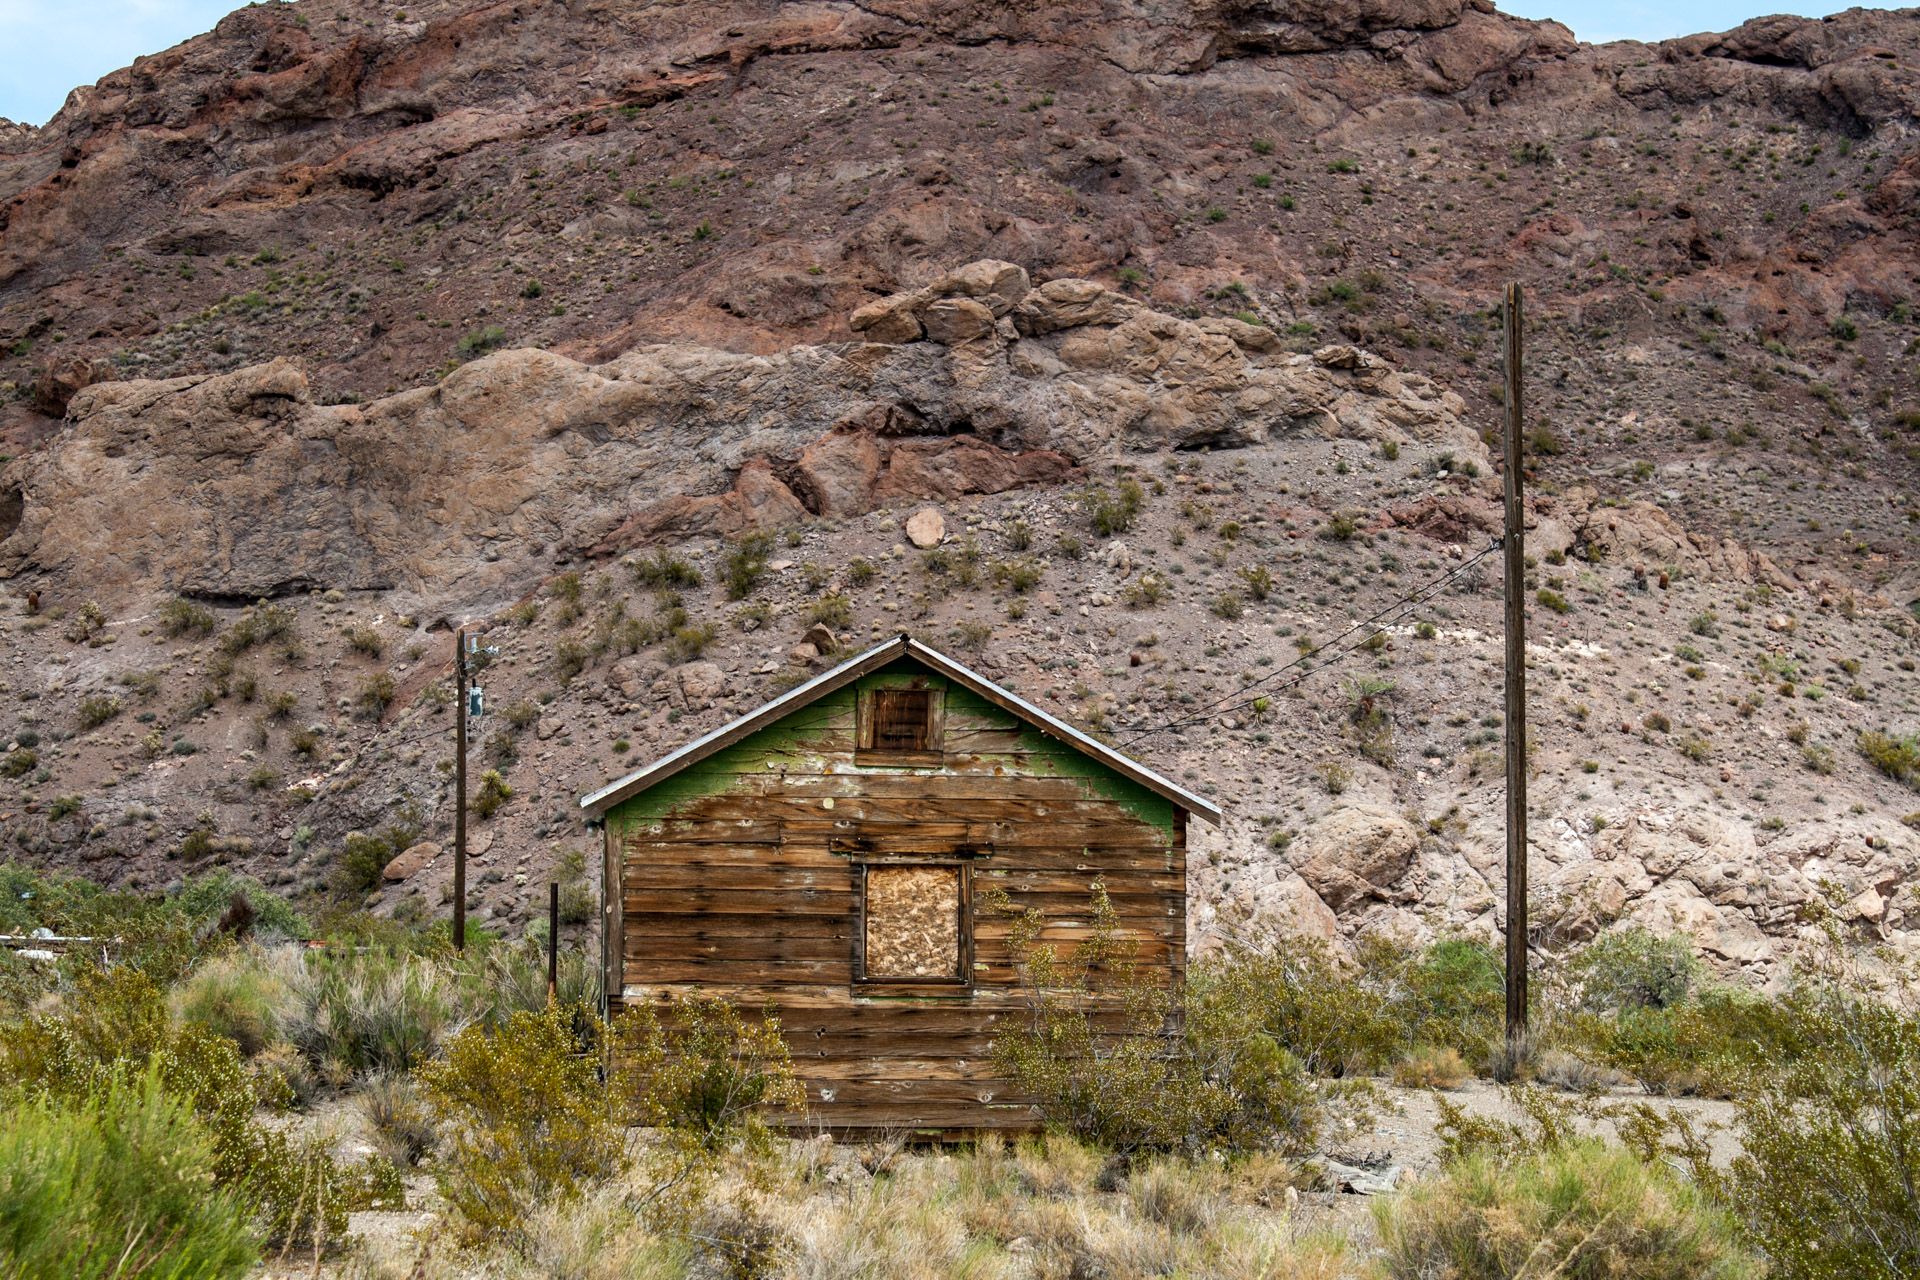 Nelson, Nevada - A Weathered Mining Town House (straight mid)